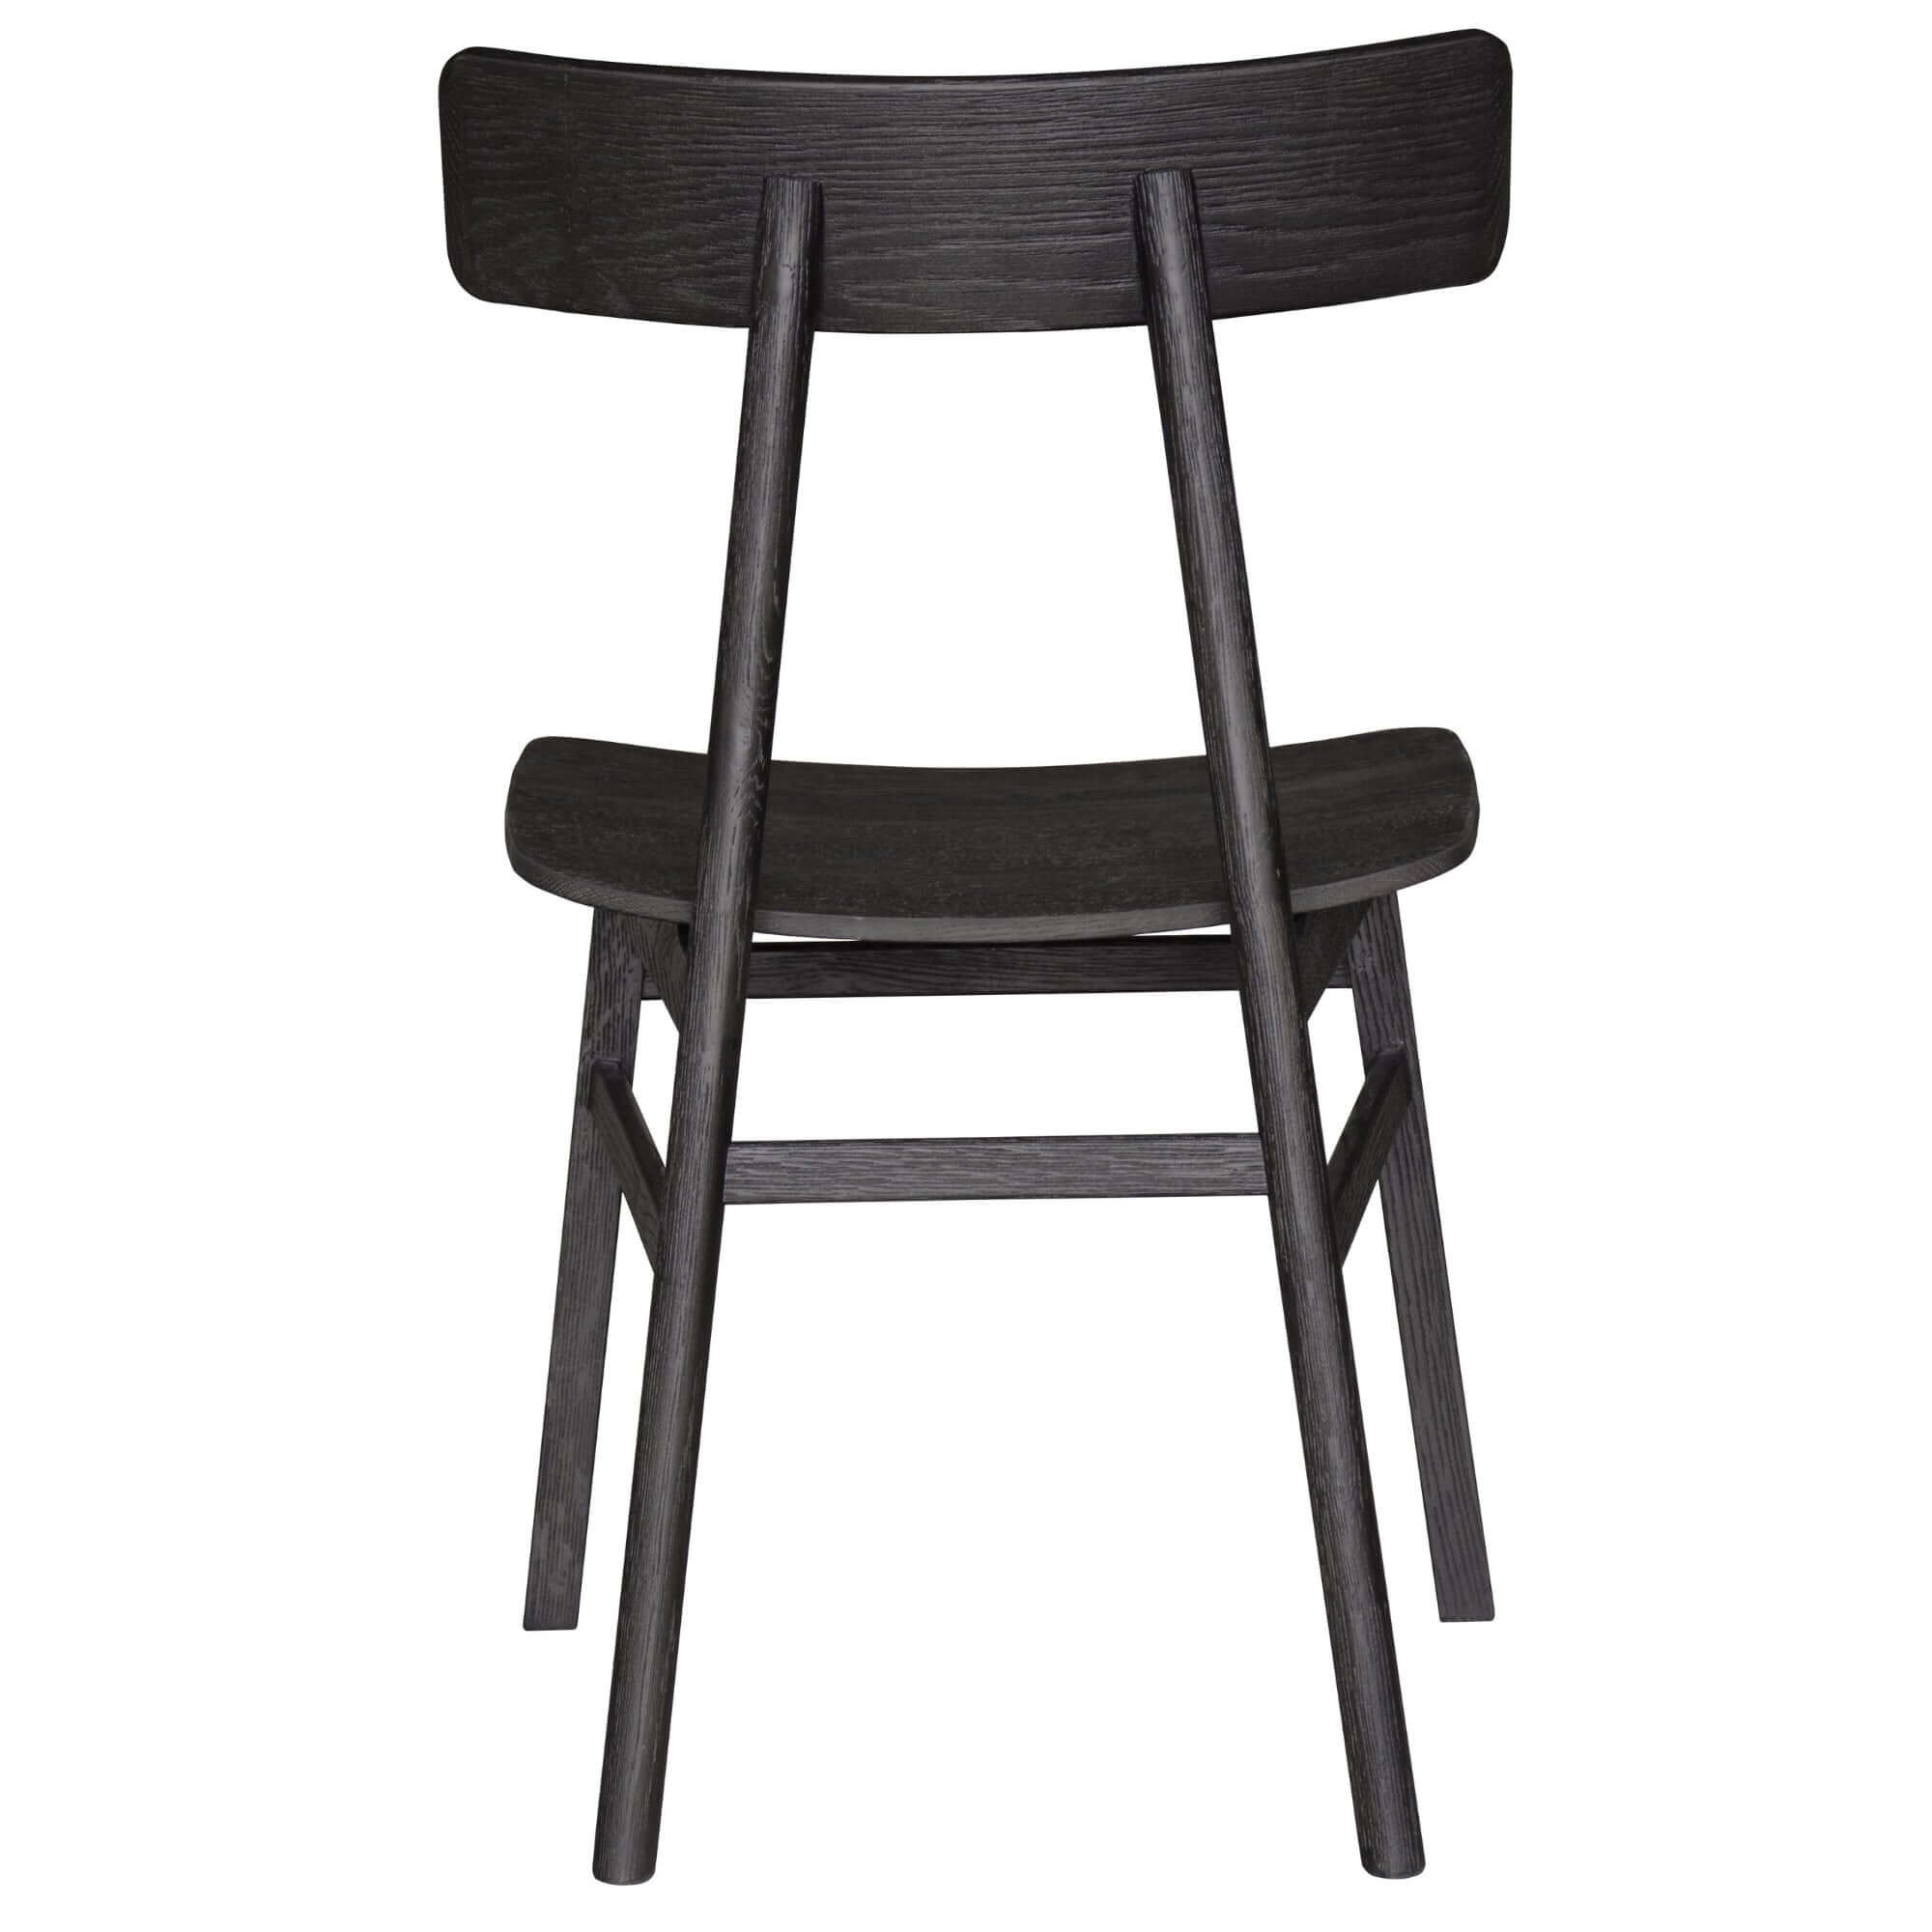 Claire Oak Dining Chairs (4) - Black Solid Wood Seating-Upinteriors